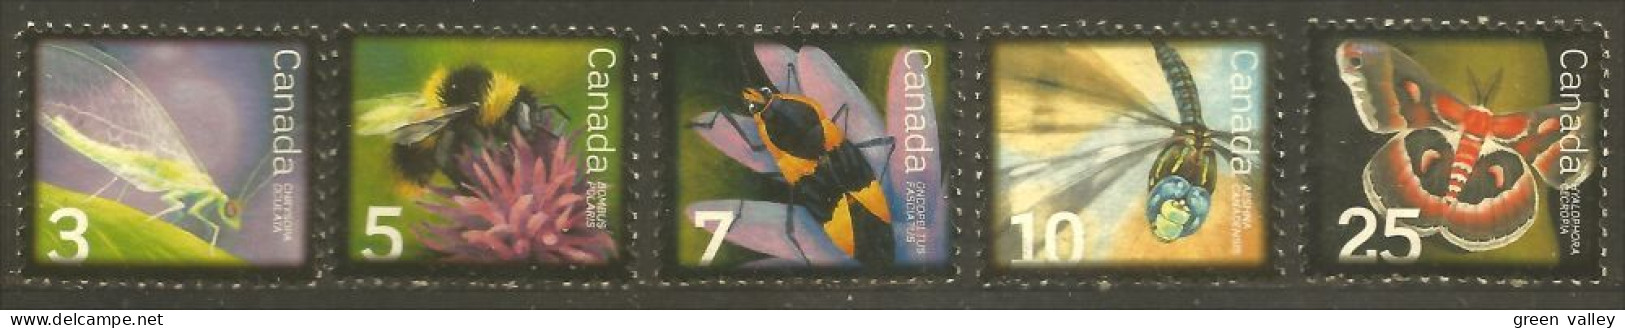 970 Canada Insectes Coccinelle Papillon Abeille Libellule Dragonfly Bee Biene Butterfly Sans Gomme (322) - Abejas